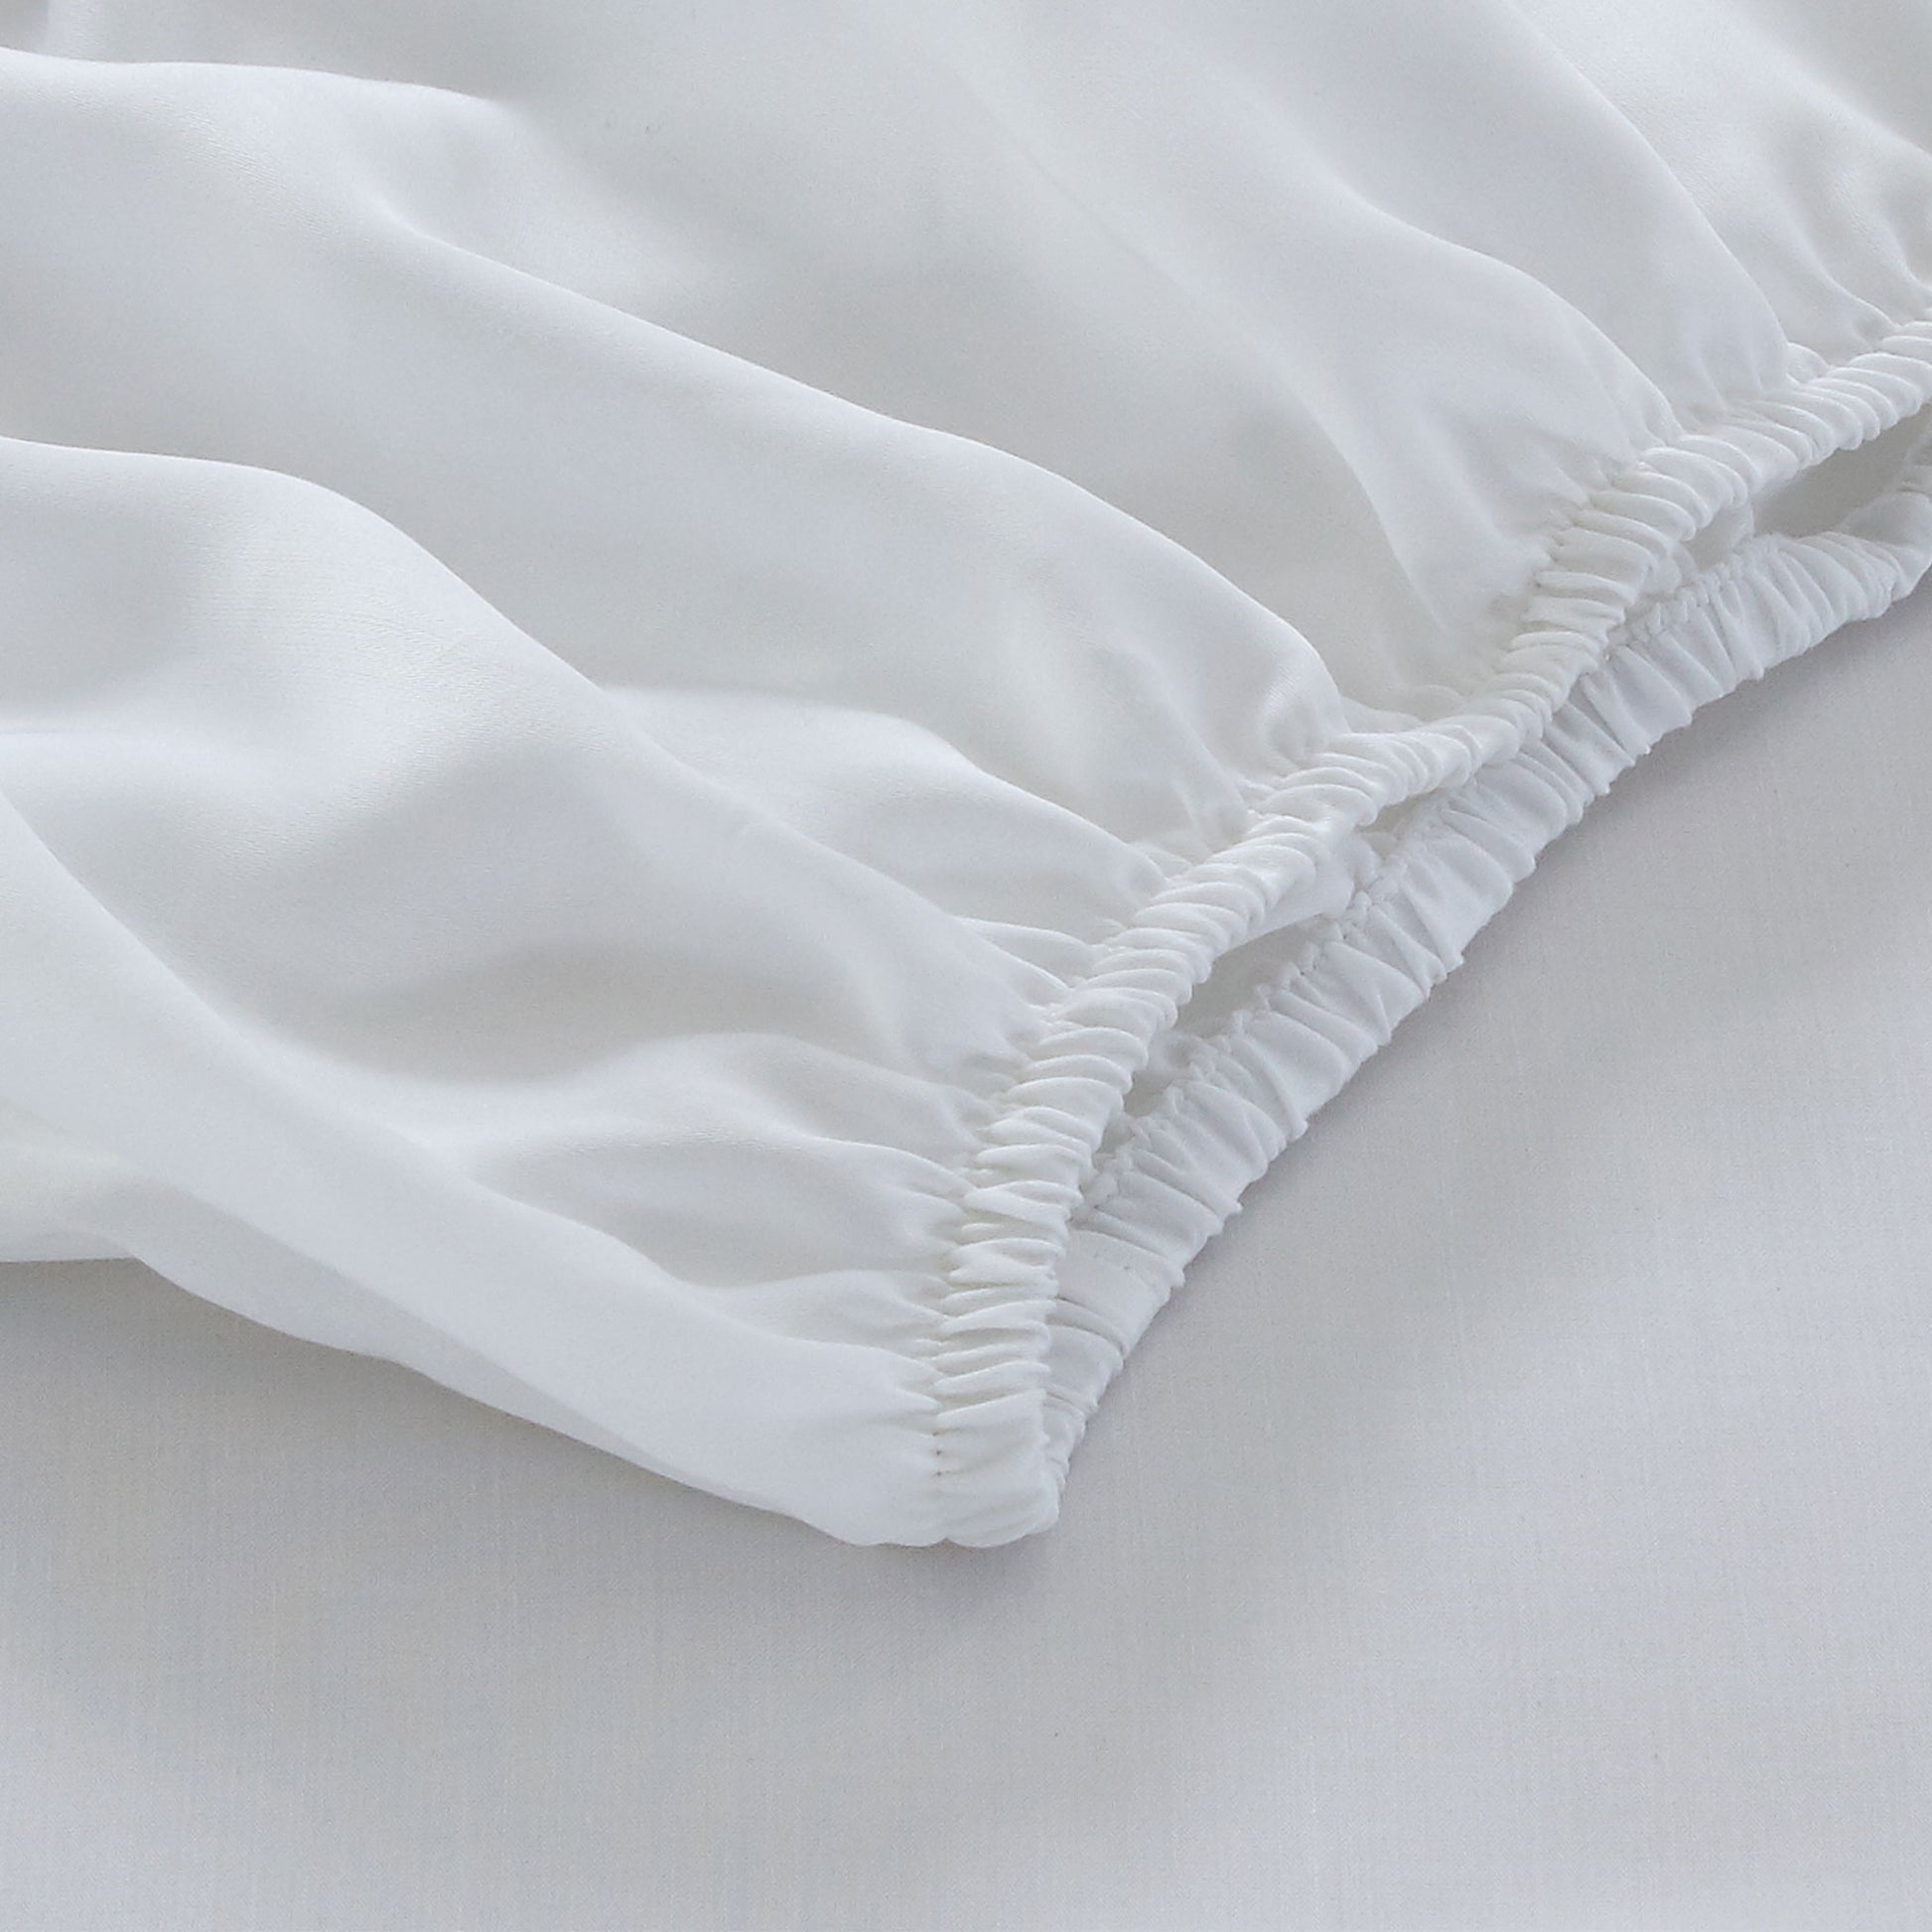 100% cotton sheet, fitted sheet with elasticated non-slip